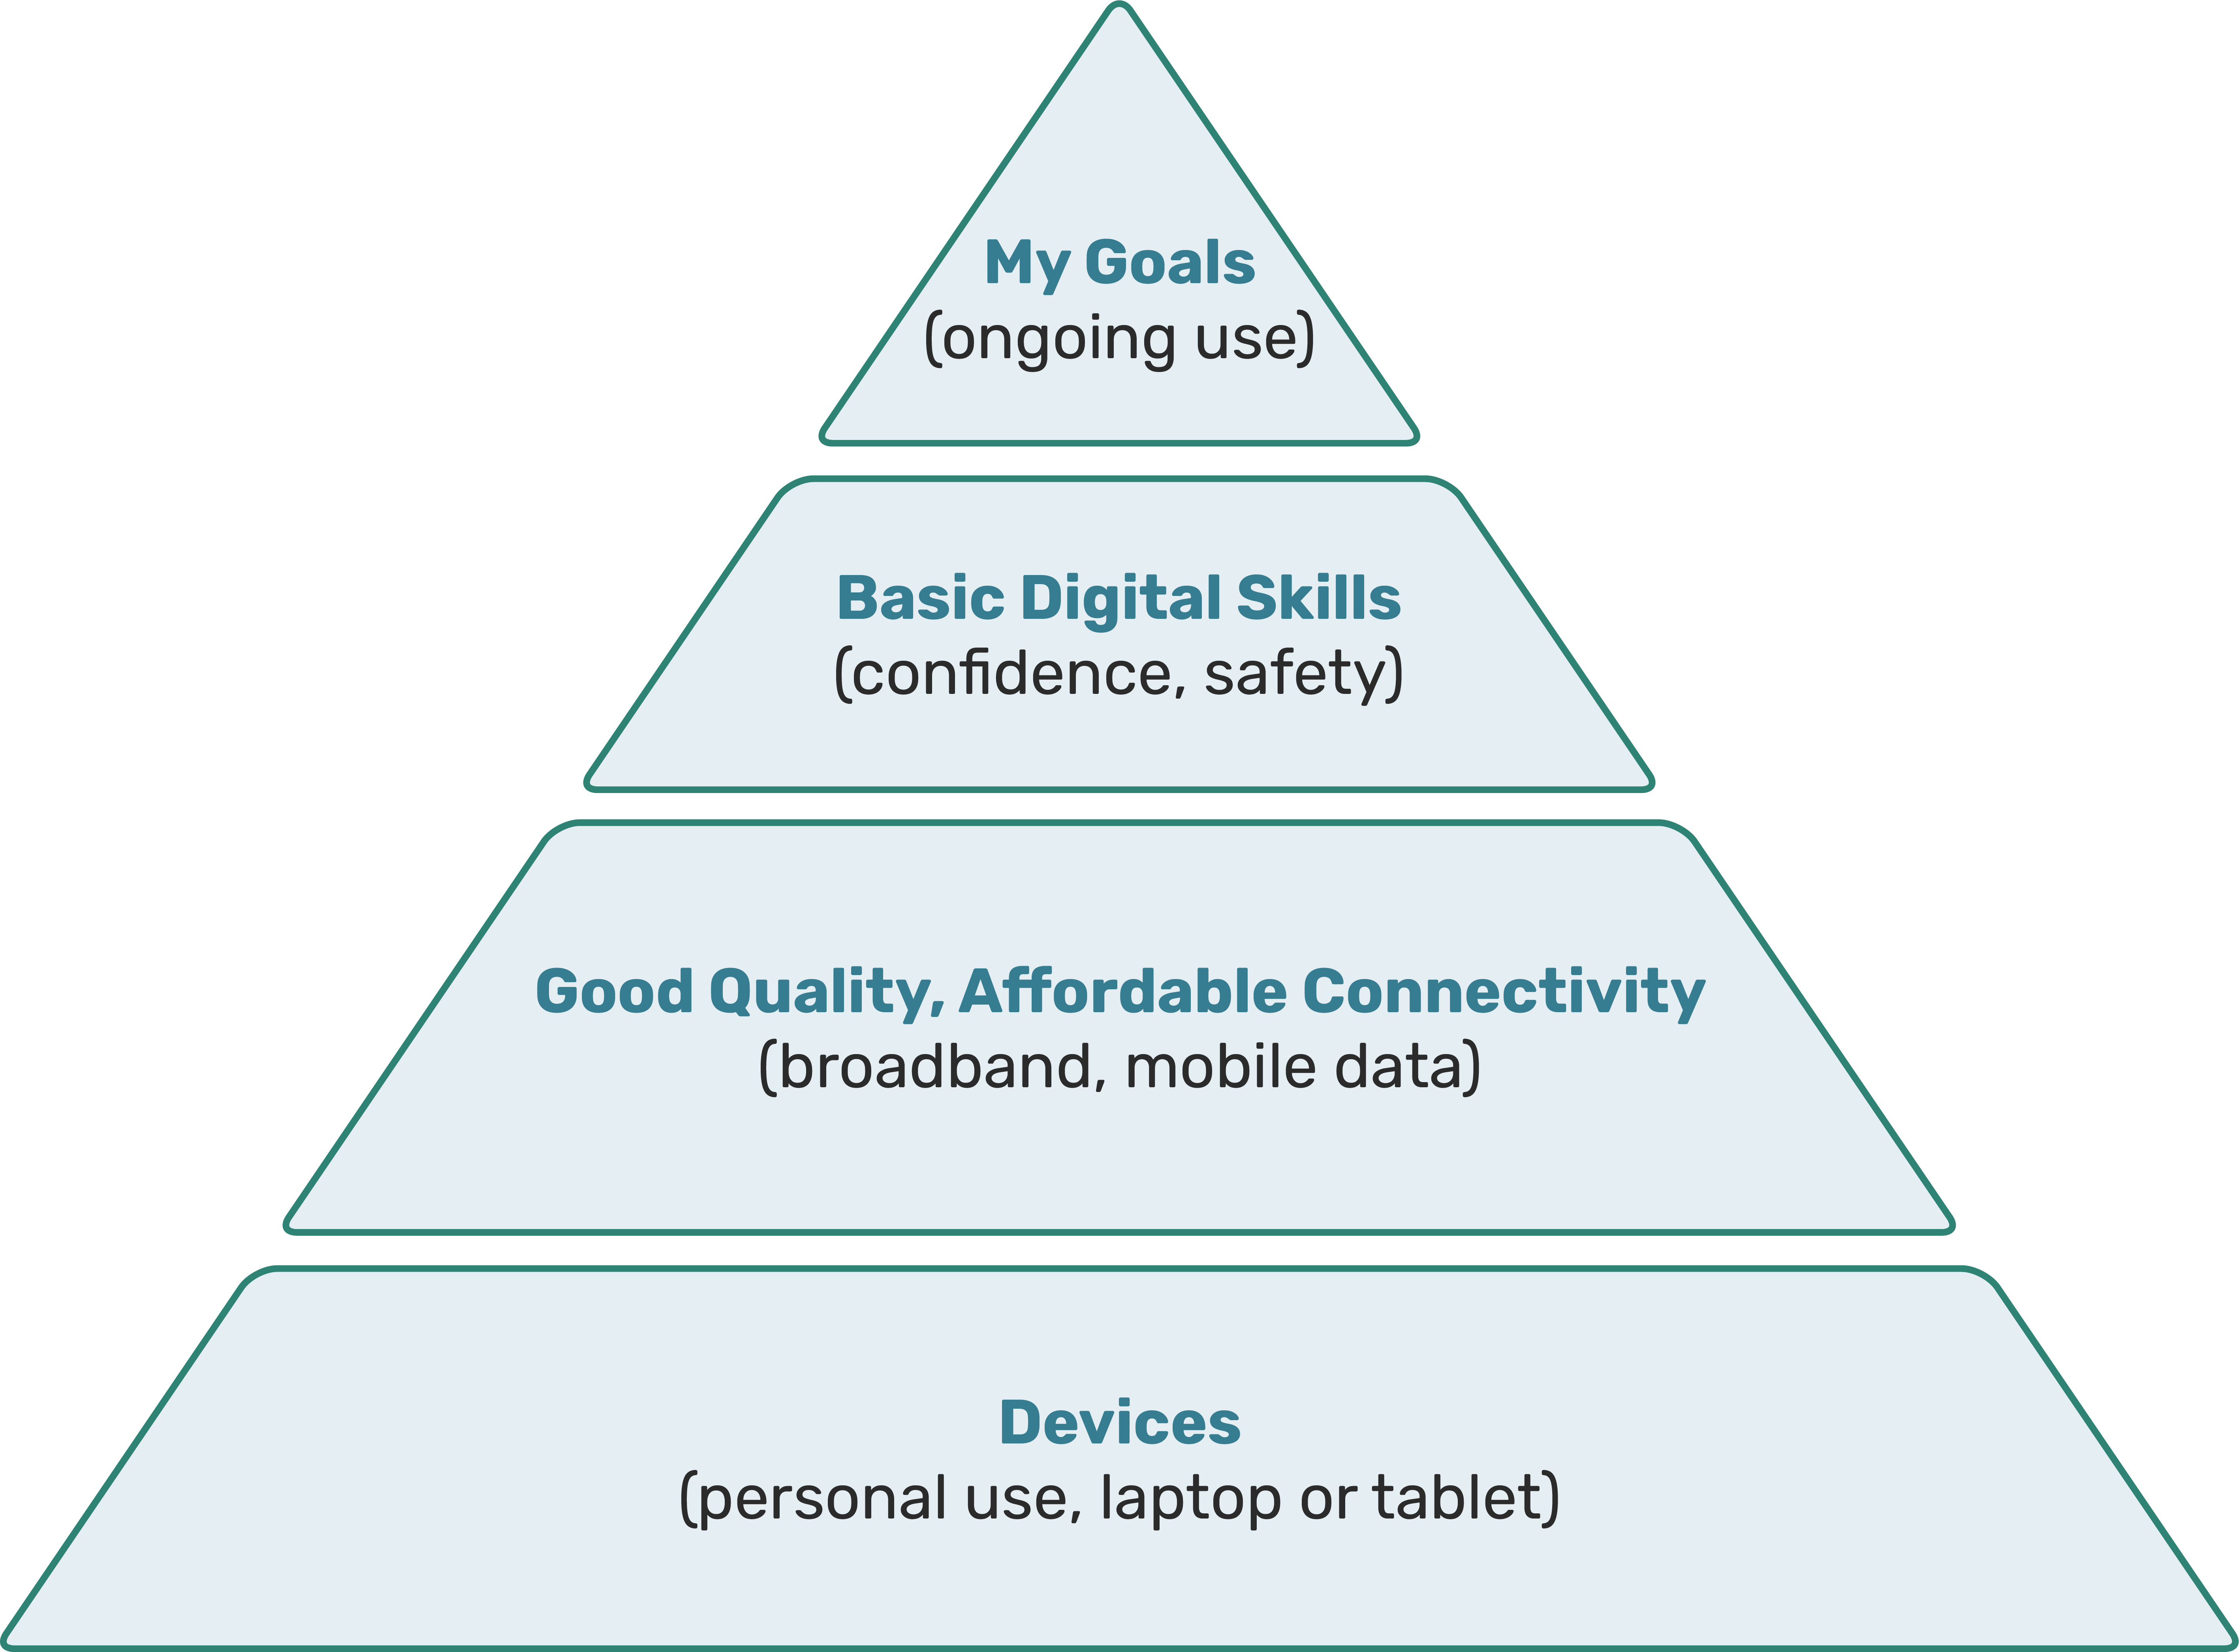 A pyramid-shaped diagram showing what people need to end data poverty. Firstly, access to devices. Secondly, access to good quality, affordable connectivity. Finally, basic digital skills, all to achieve their goals.